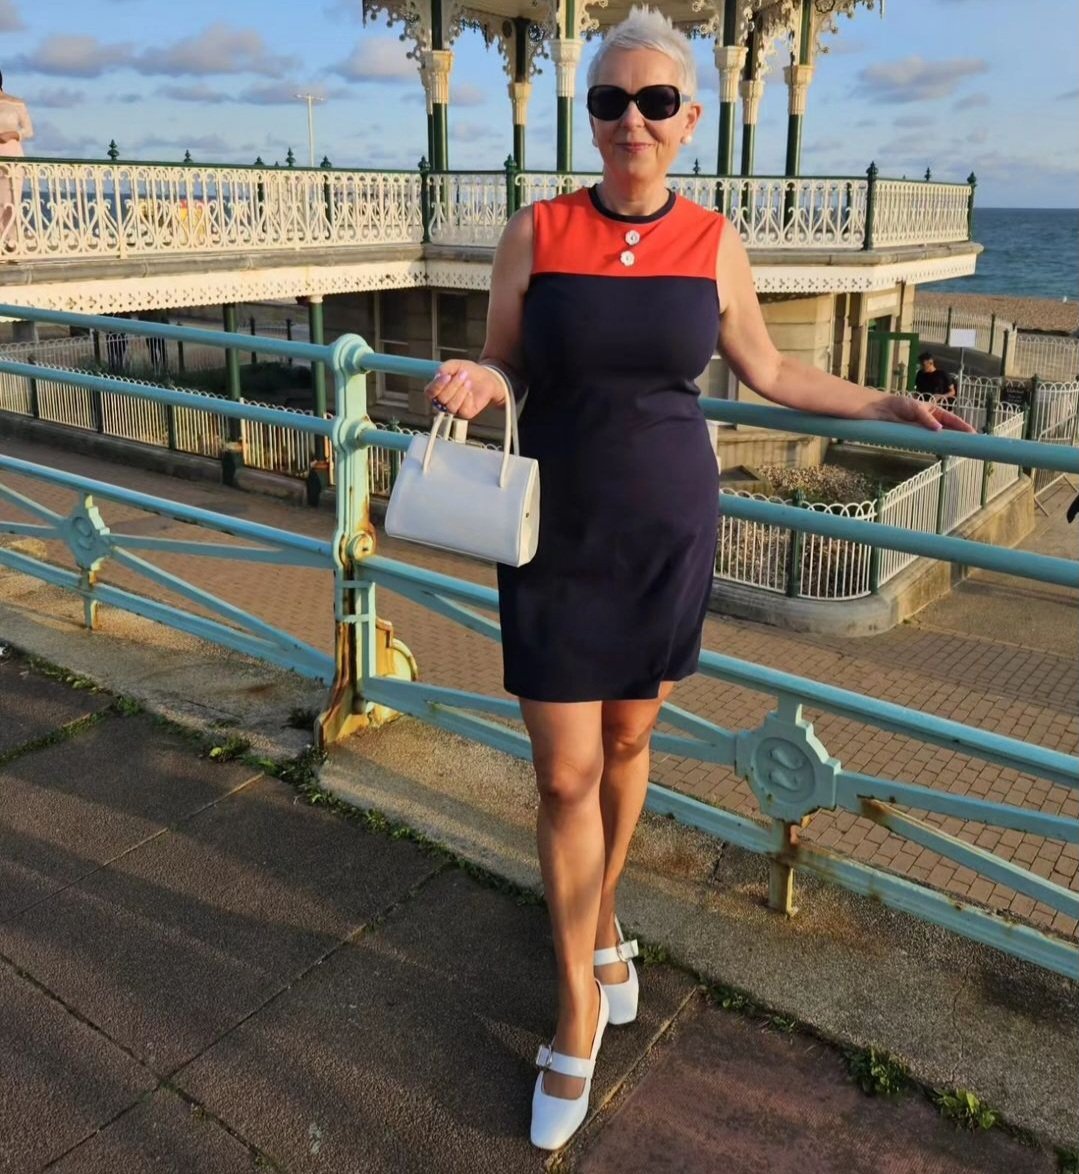 Big thanks to Amelia for this sunny photo of her in our Layla #mod dress xx

lovehermadlyboutique.com/shop/layla

#1960sfashion #1960s #Sixties #Sixtiesdress #60sdress #Retro #Vintage #Mods #Modette